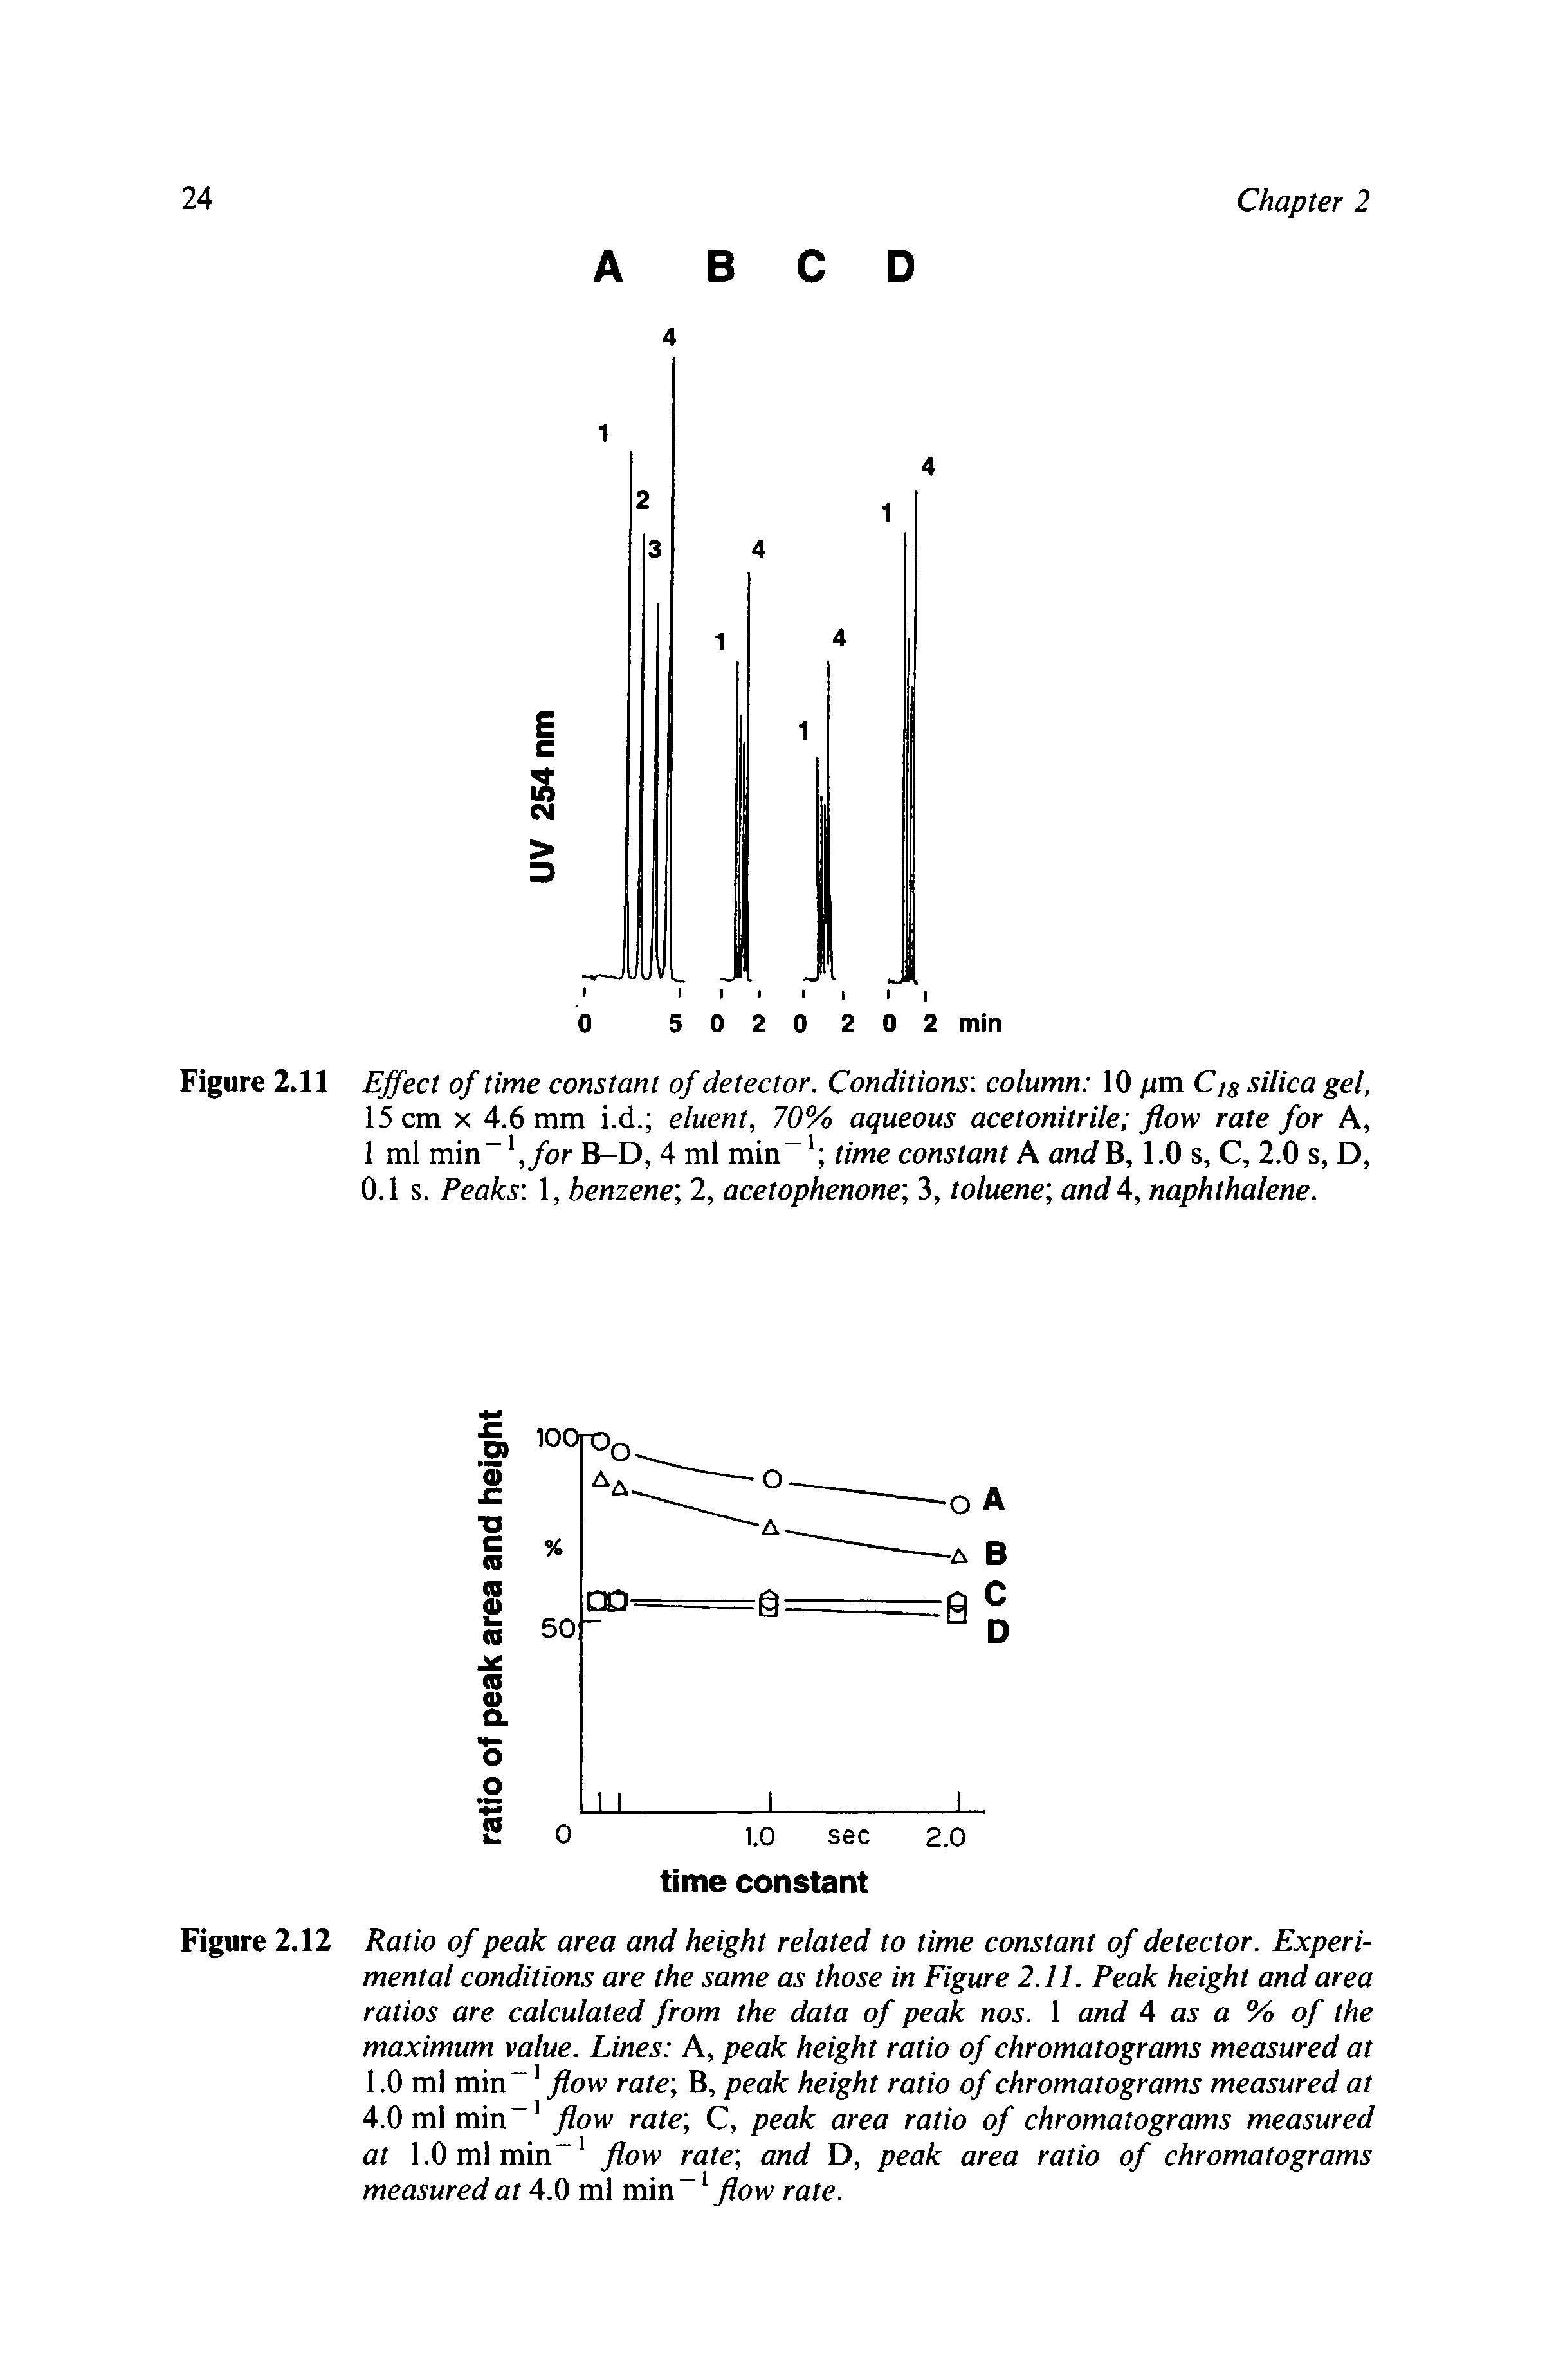 Figure 2.12 Ratio of peak area and height related to time constant of detector. Experimental conditions are the same as those in Figure 2.11. Peak height and area ratios are calculated from the data of peak nos. 1 and 4 as a %> of the maximum value. Lines A, peak height ratio of chromatograms measured at...